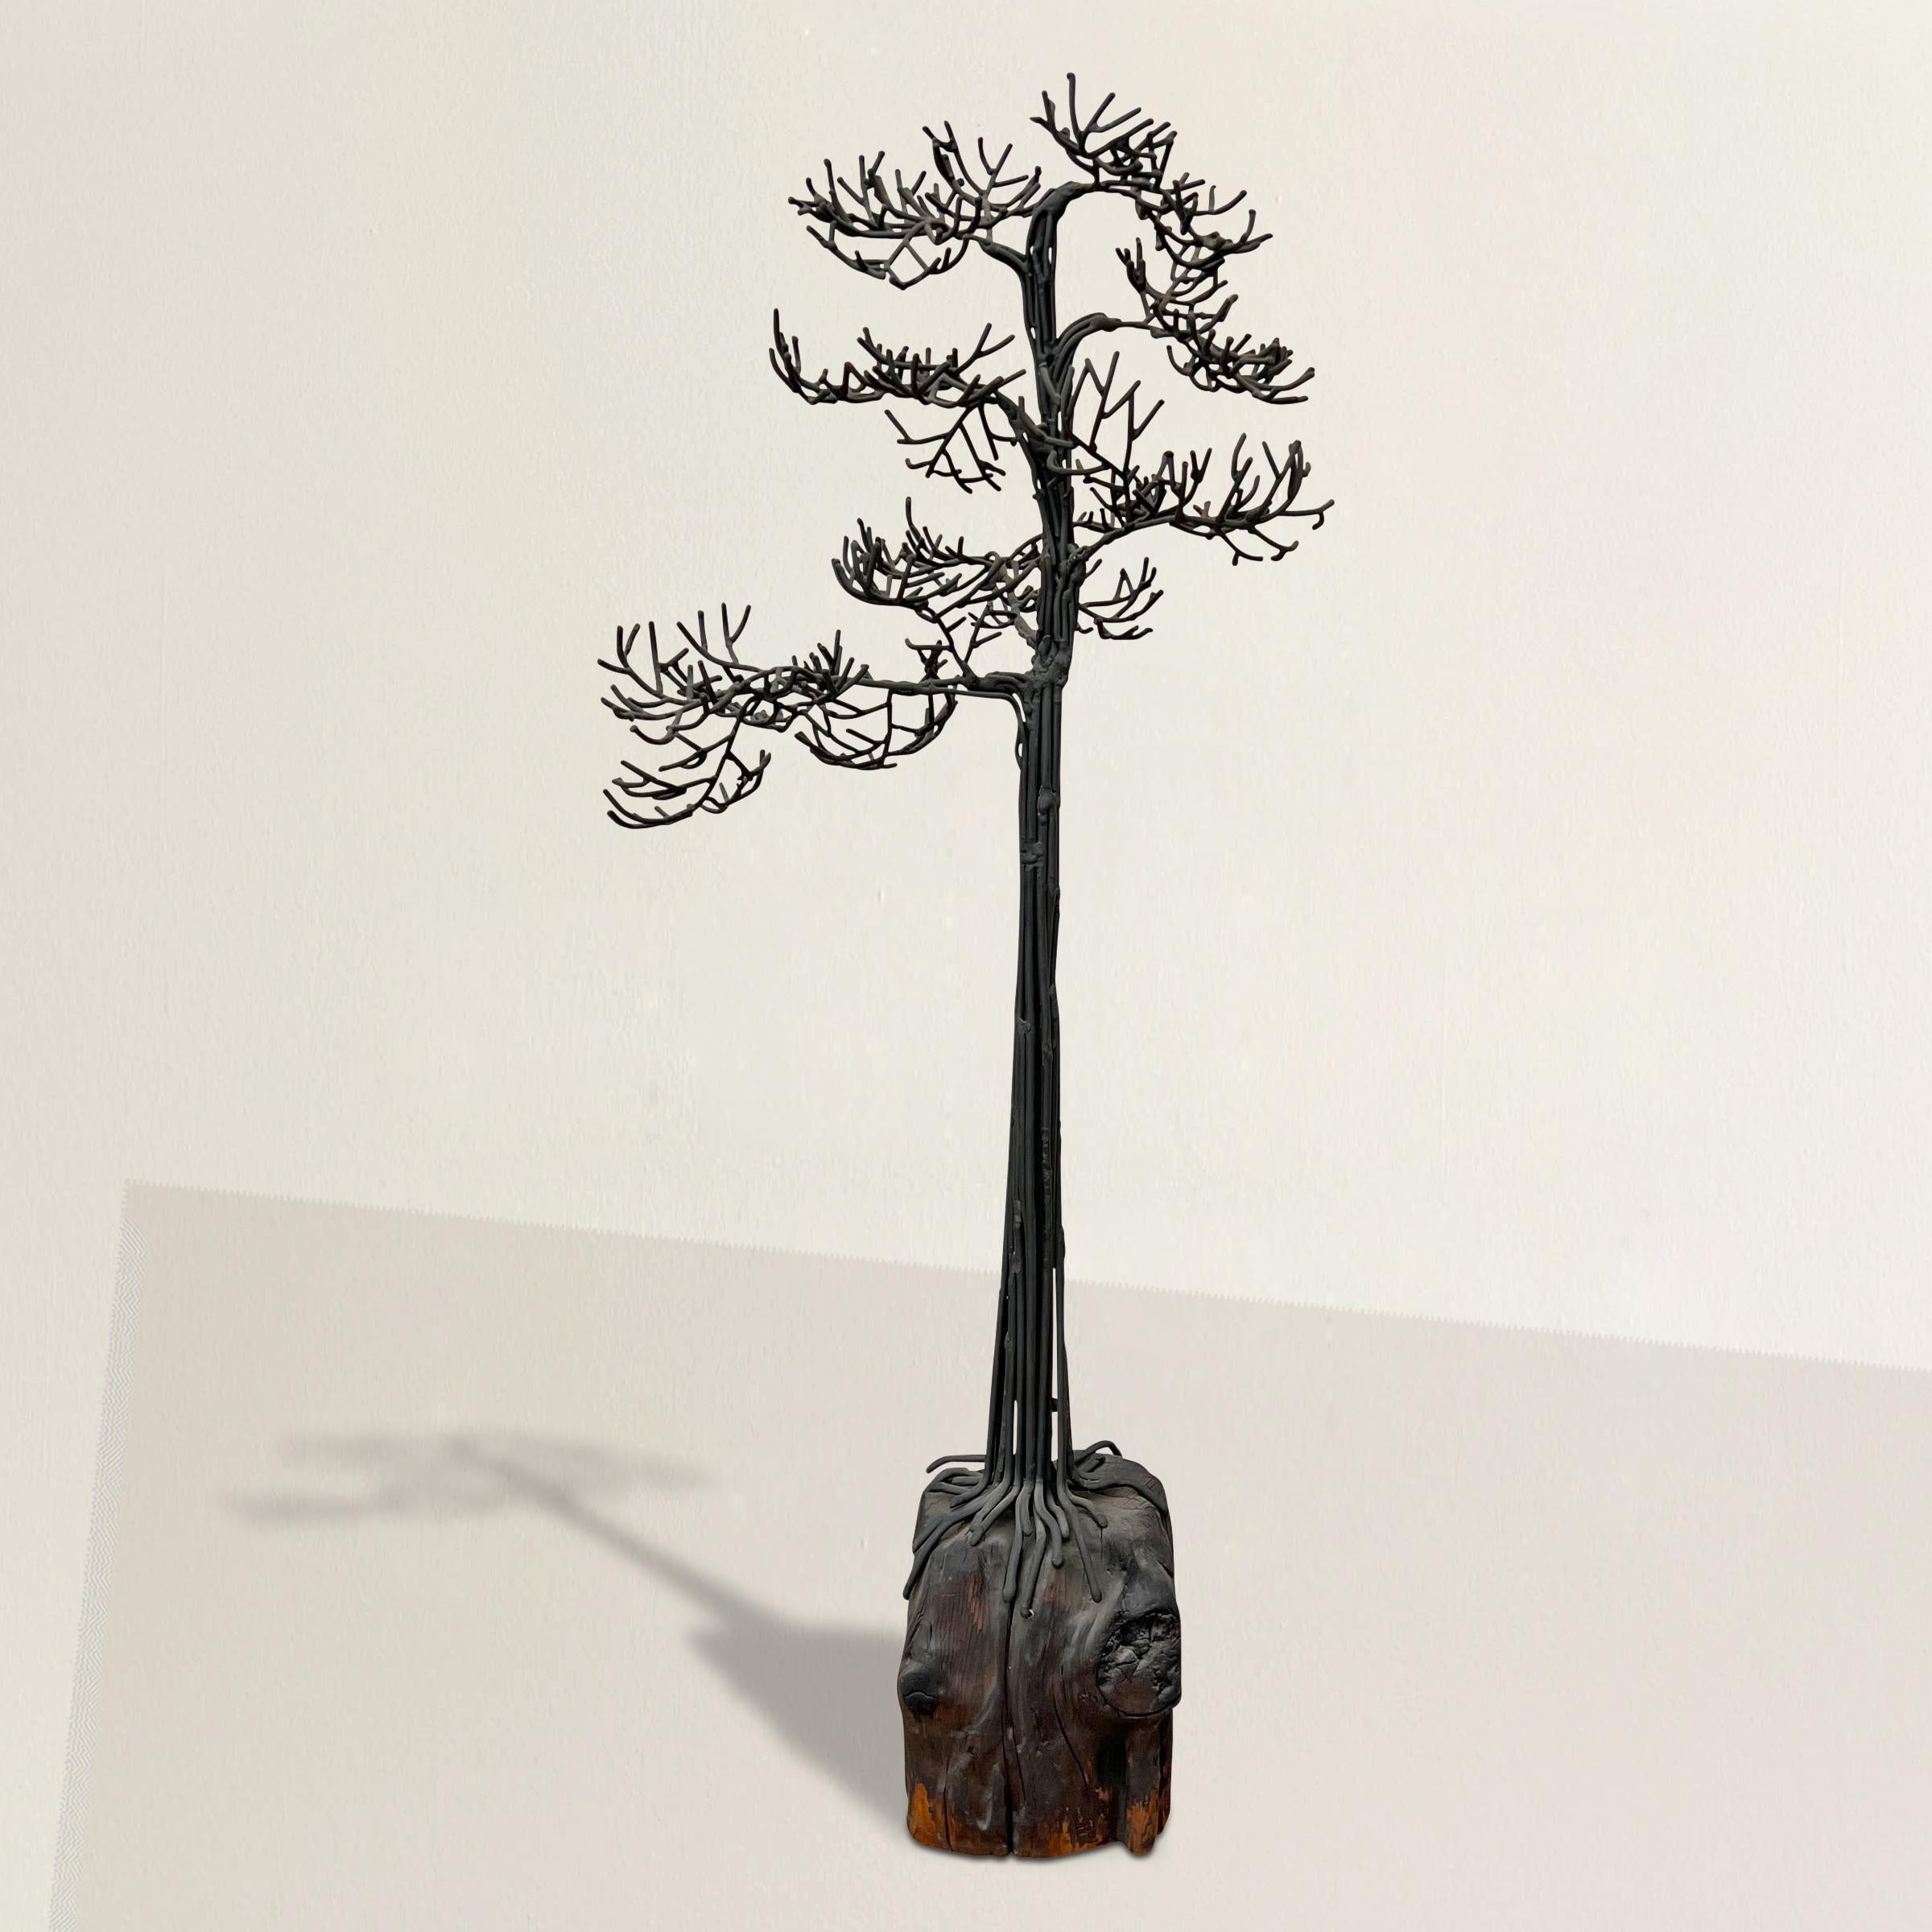 This mid-20th century Brutalist bronze bonsai tree sculpture, a masterful creation by the renowned American artist Belva Ball, stands as a testament to her influence within the Brutalist movement. Crafted from hundreds of meticulously welded bronze